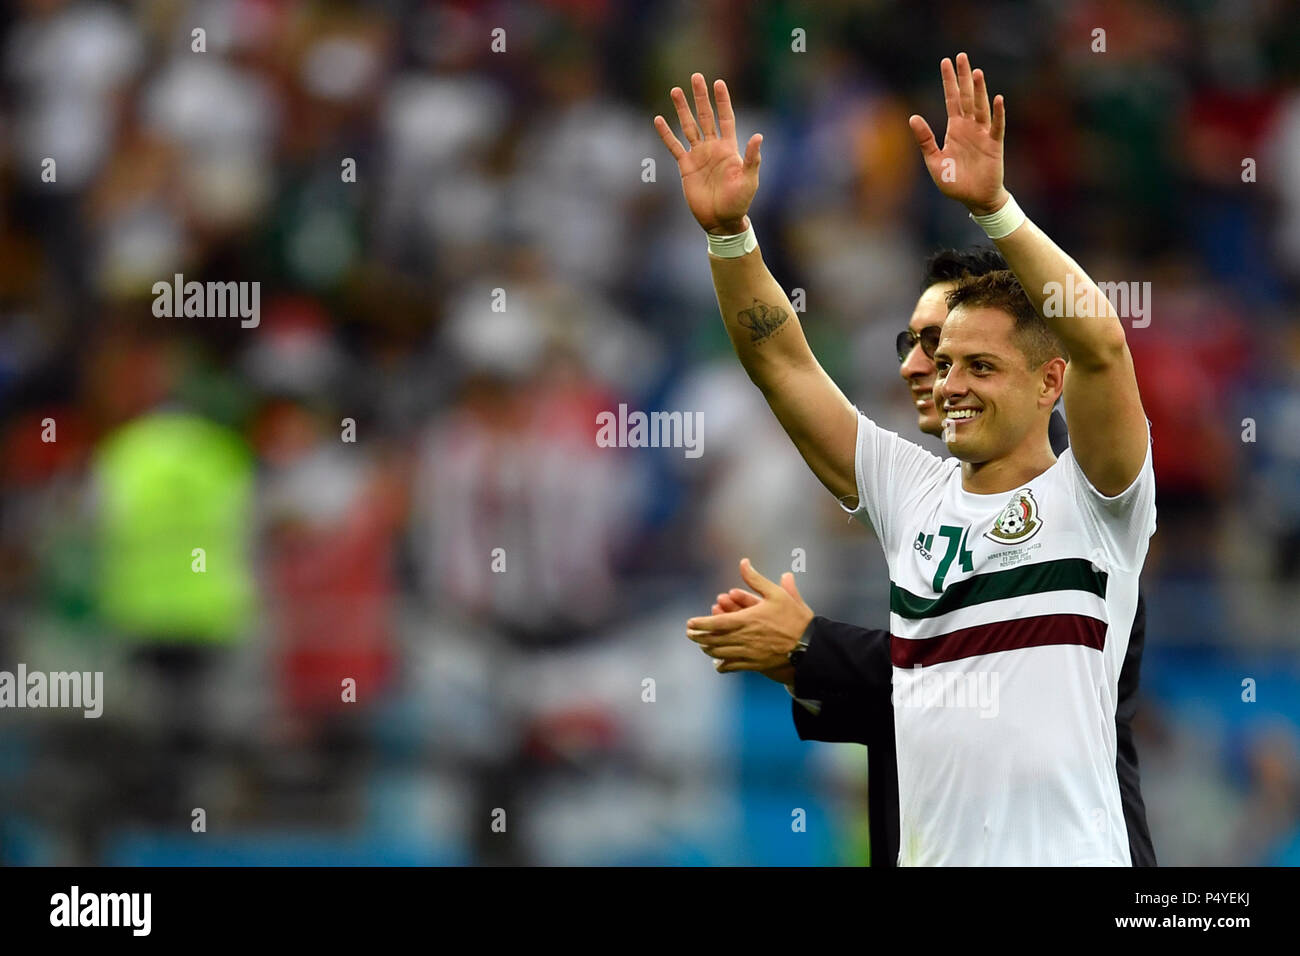 Rostov-on-Don, Russia. 23rd June, 2018. Soccer, FIFA World Cup 2018, South Korea vs Mexico, group stages, Group F, 2nd matchday at the Rostov-on-Don Stadium: Chicharito of Mexico after the match. Credit: Marius Becker/dpa/Alamy Live News Stock Photo